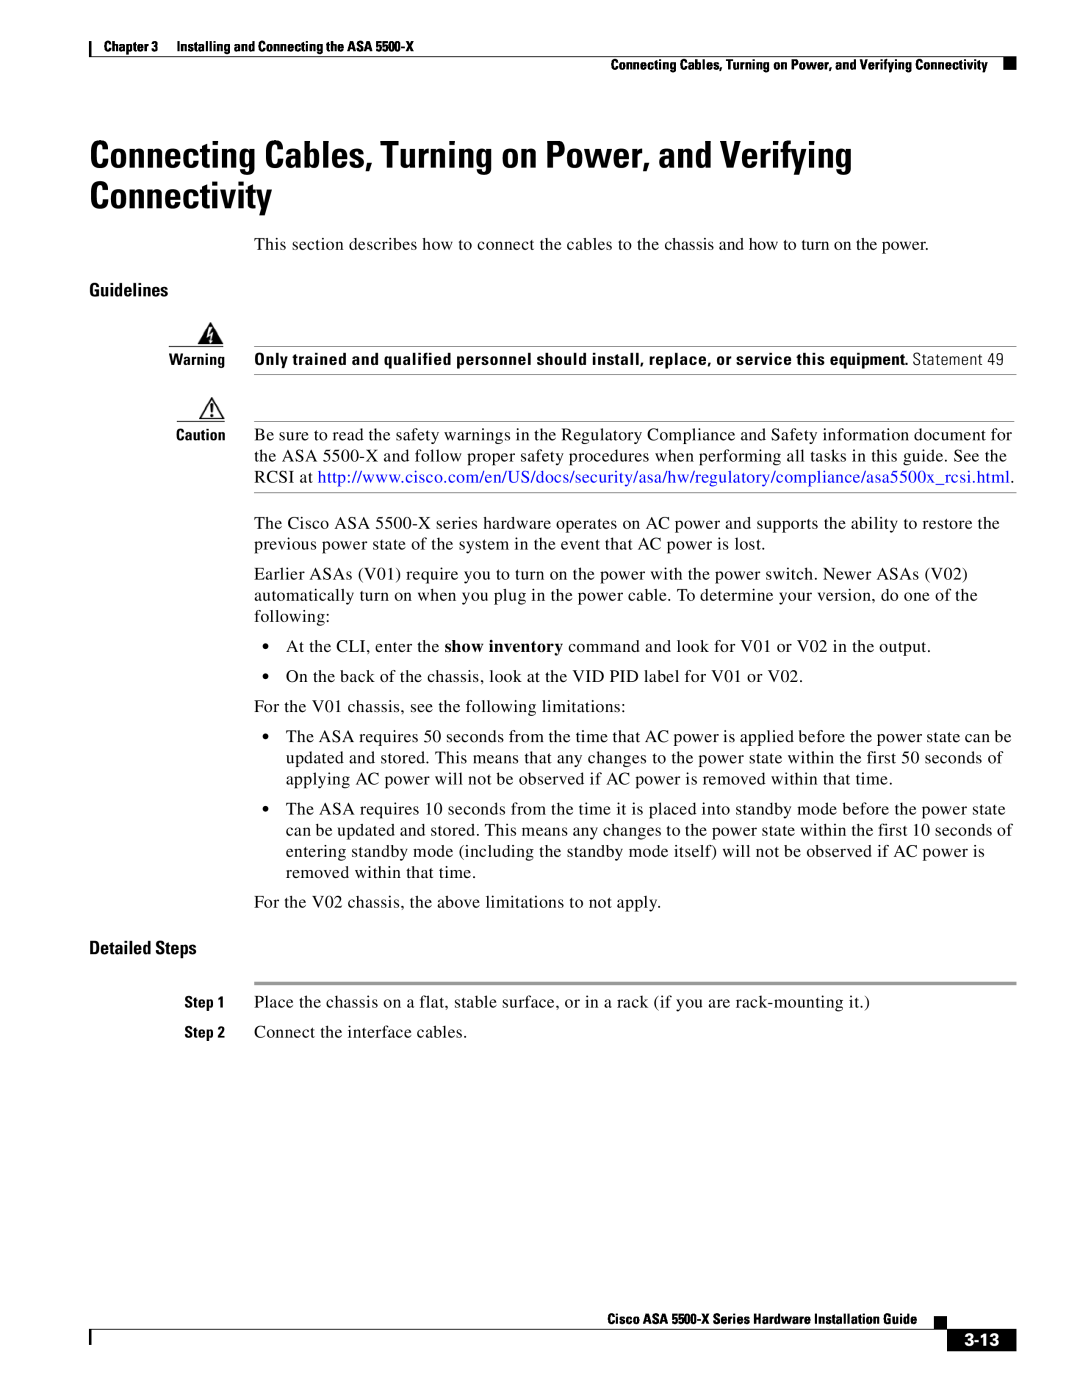 Cisco Systems kygjygcjgf Connecting Cables, Turning on Power, and Verifying Connectivity, Guidelines, 3-13, Detailed Steps 